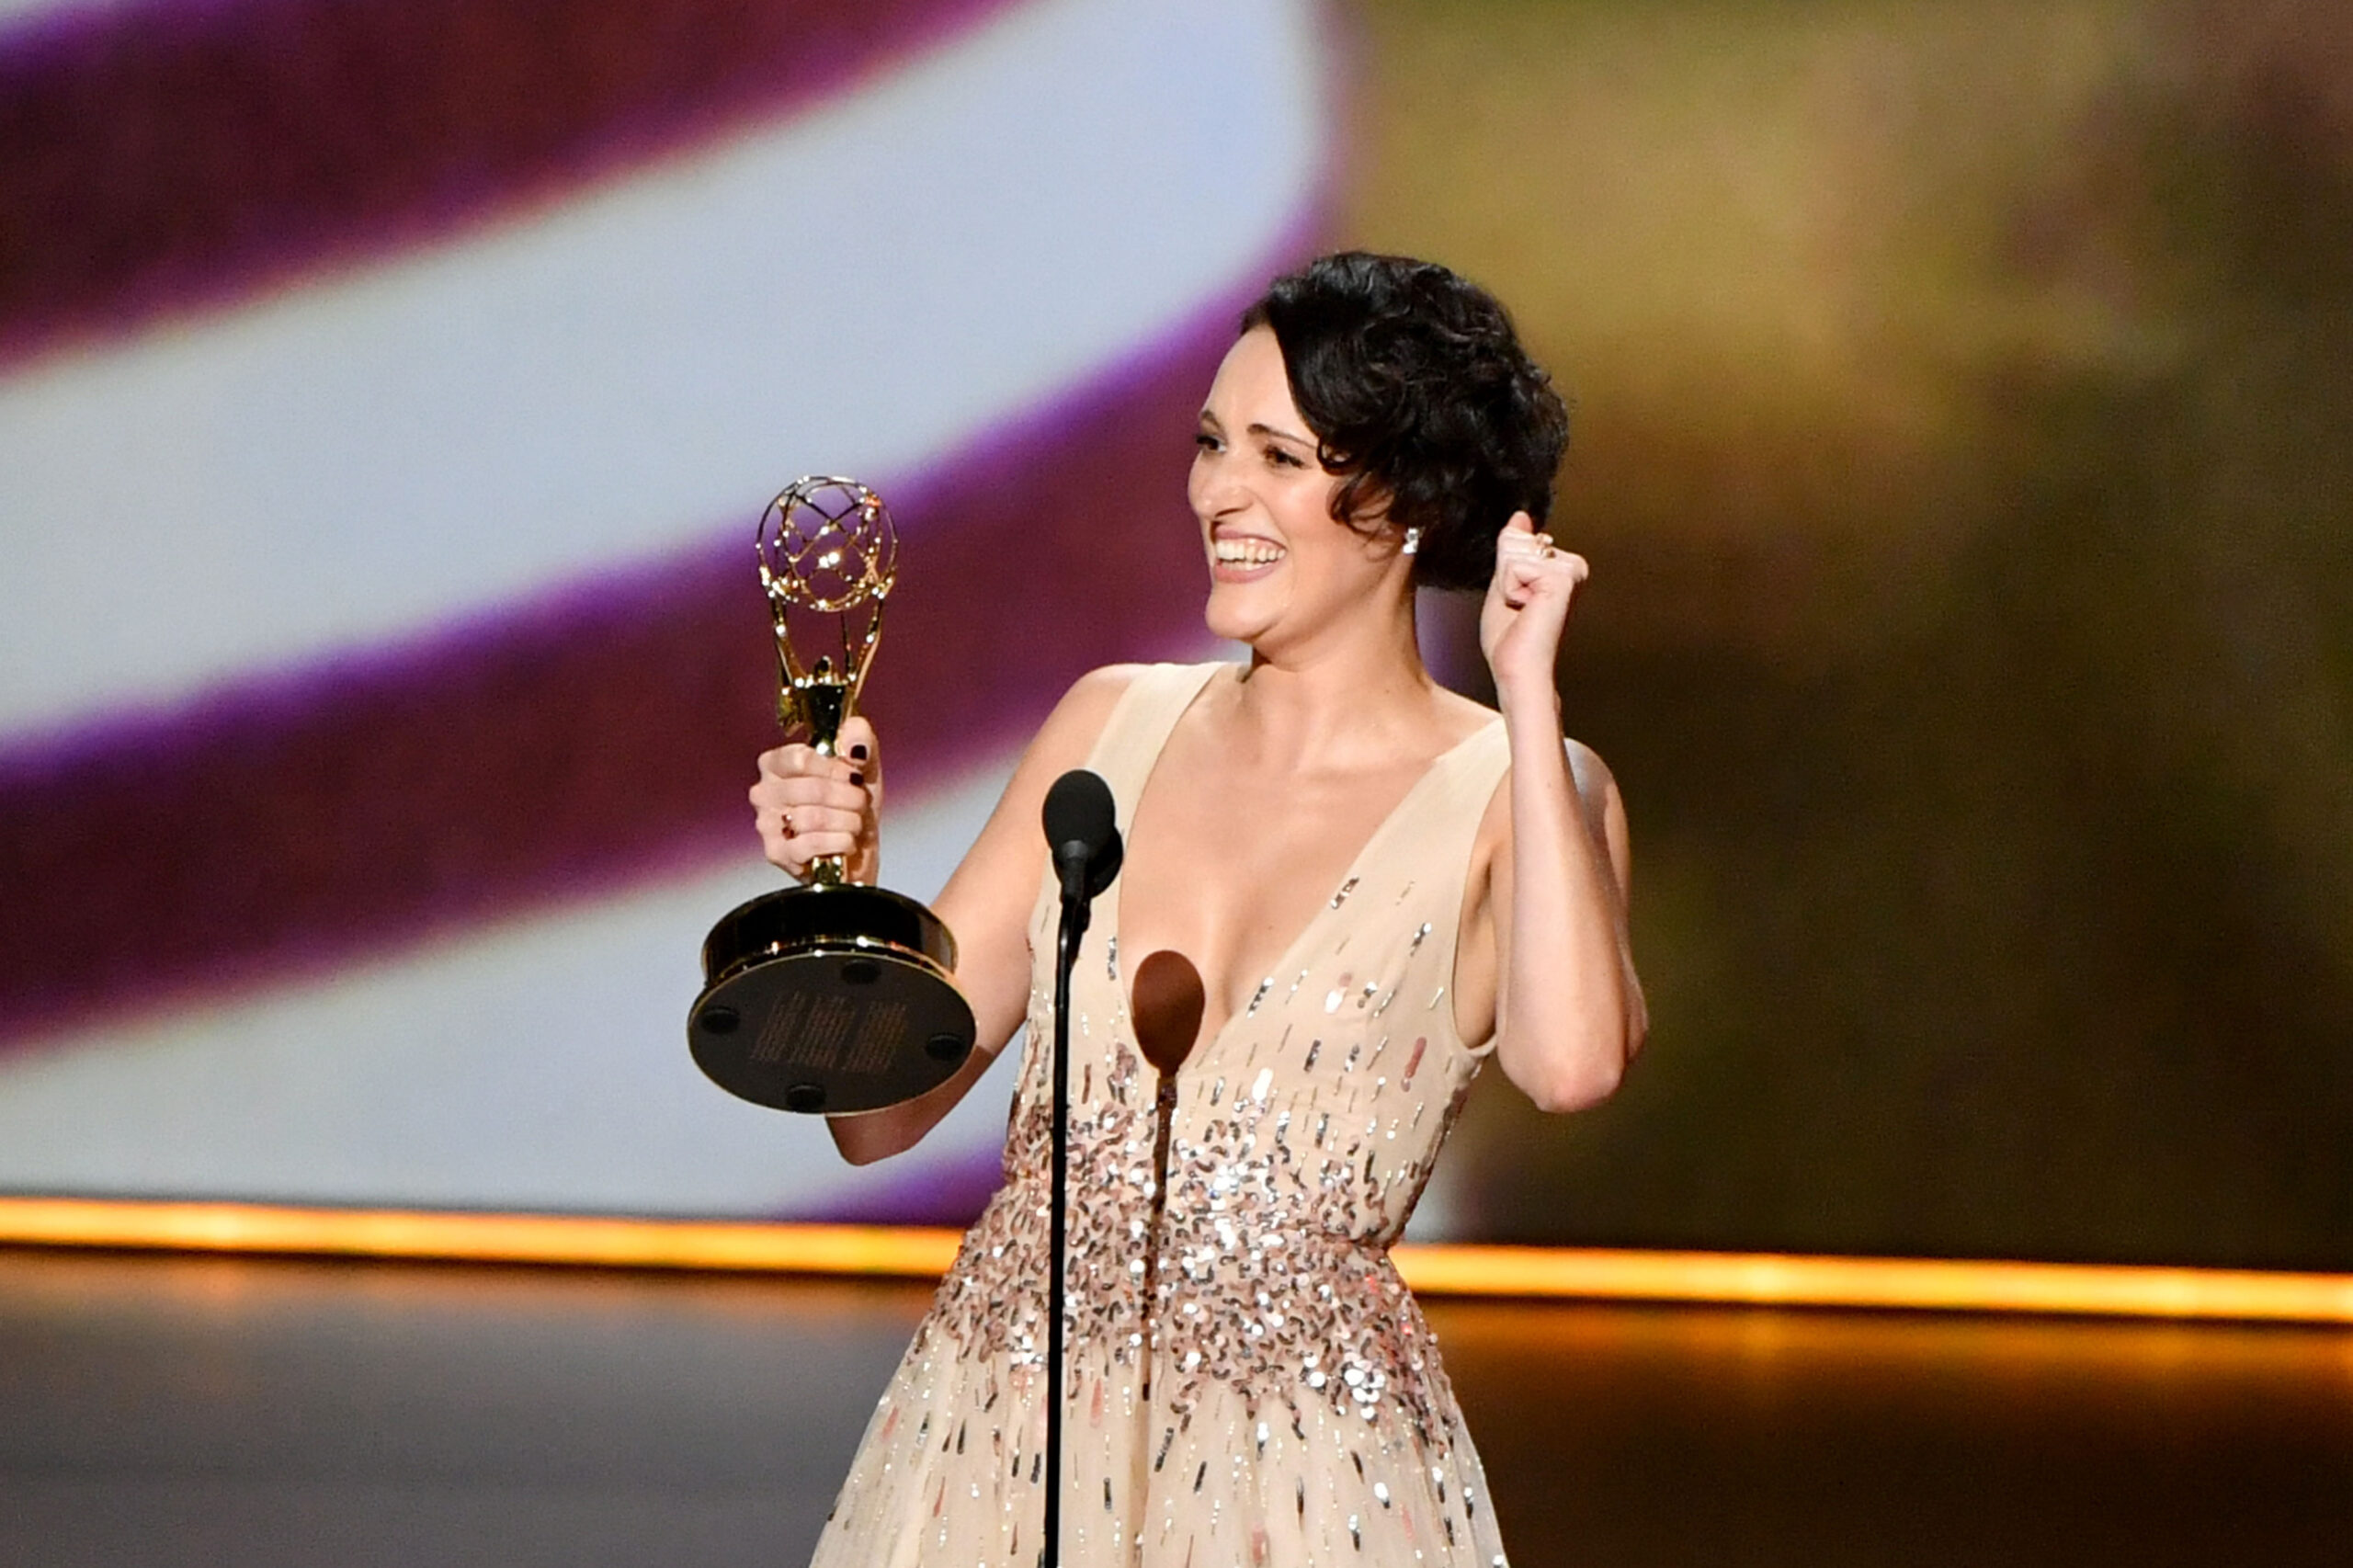 Yas Queen, Phoebe Waller-Bridge Has Won The Emmy For Outstanding Lead Actress In A Comedy